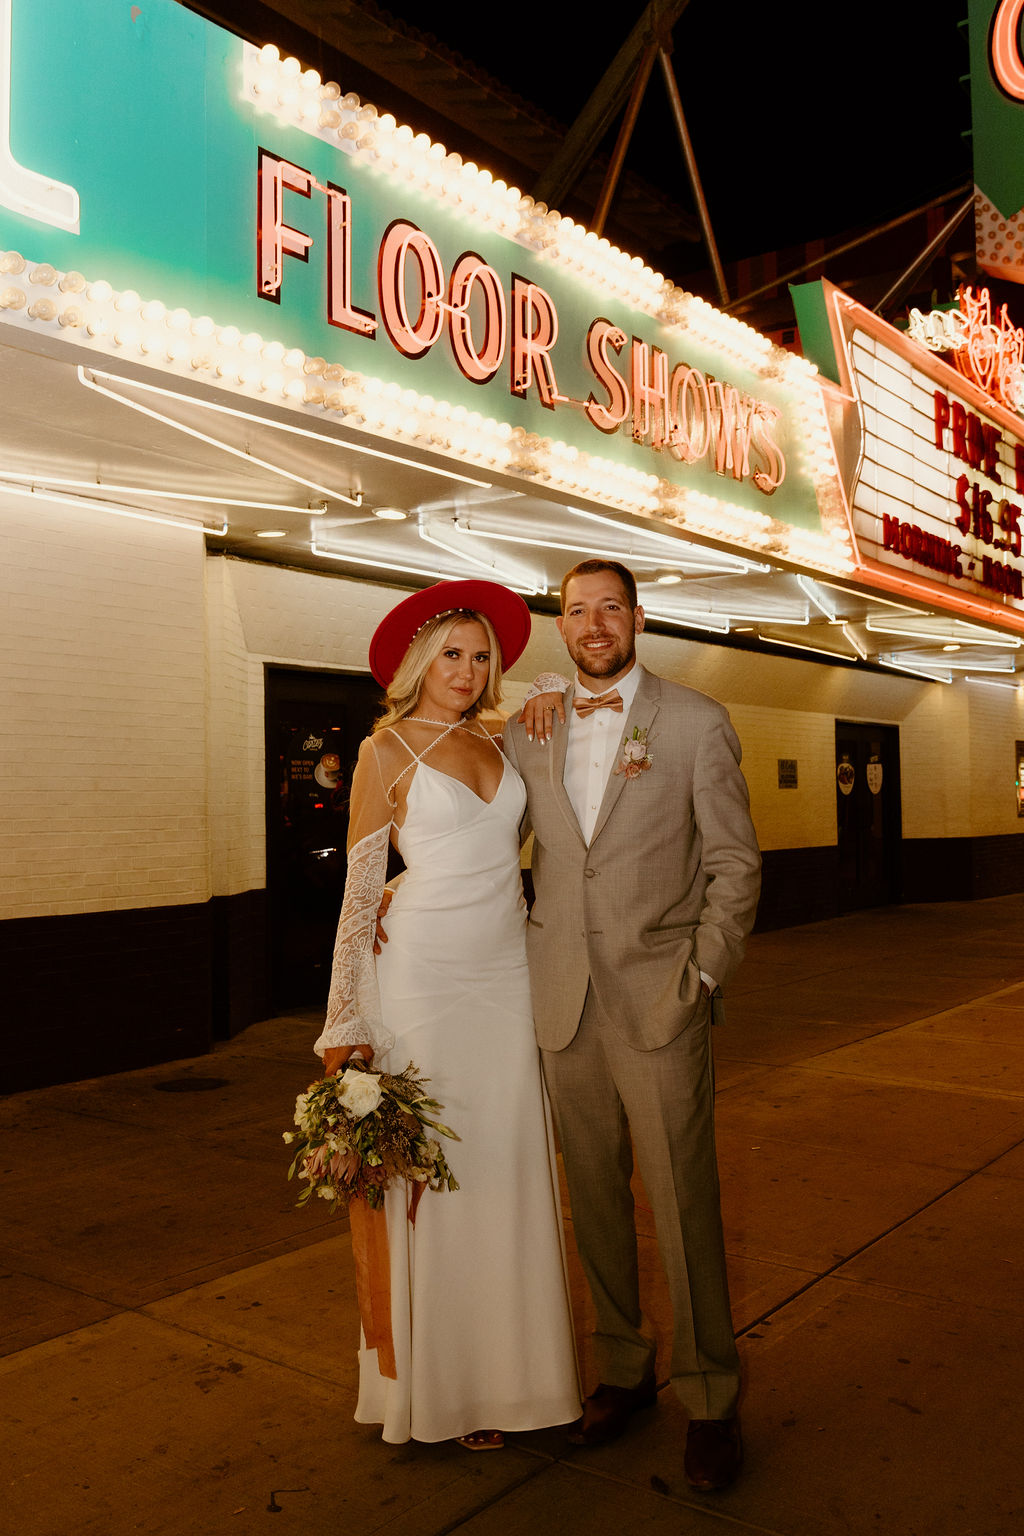 Newlyweds head downtown Las Vegas on Freemont street for some Vegas inspired photos.